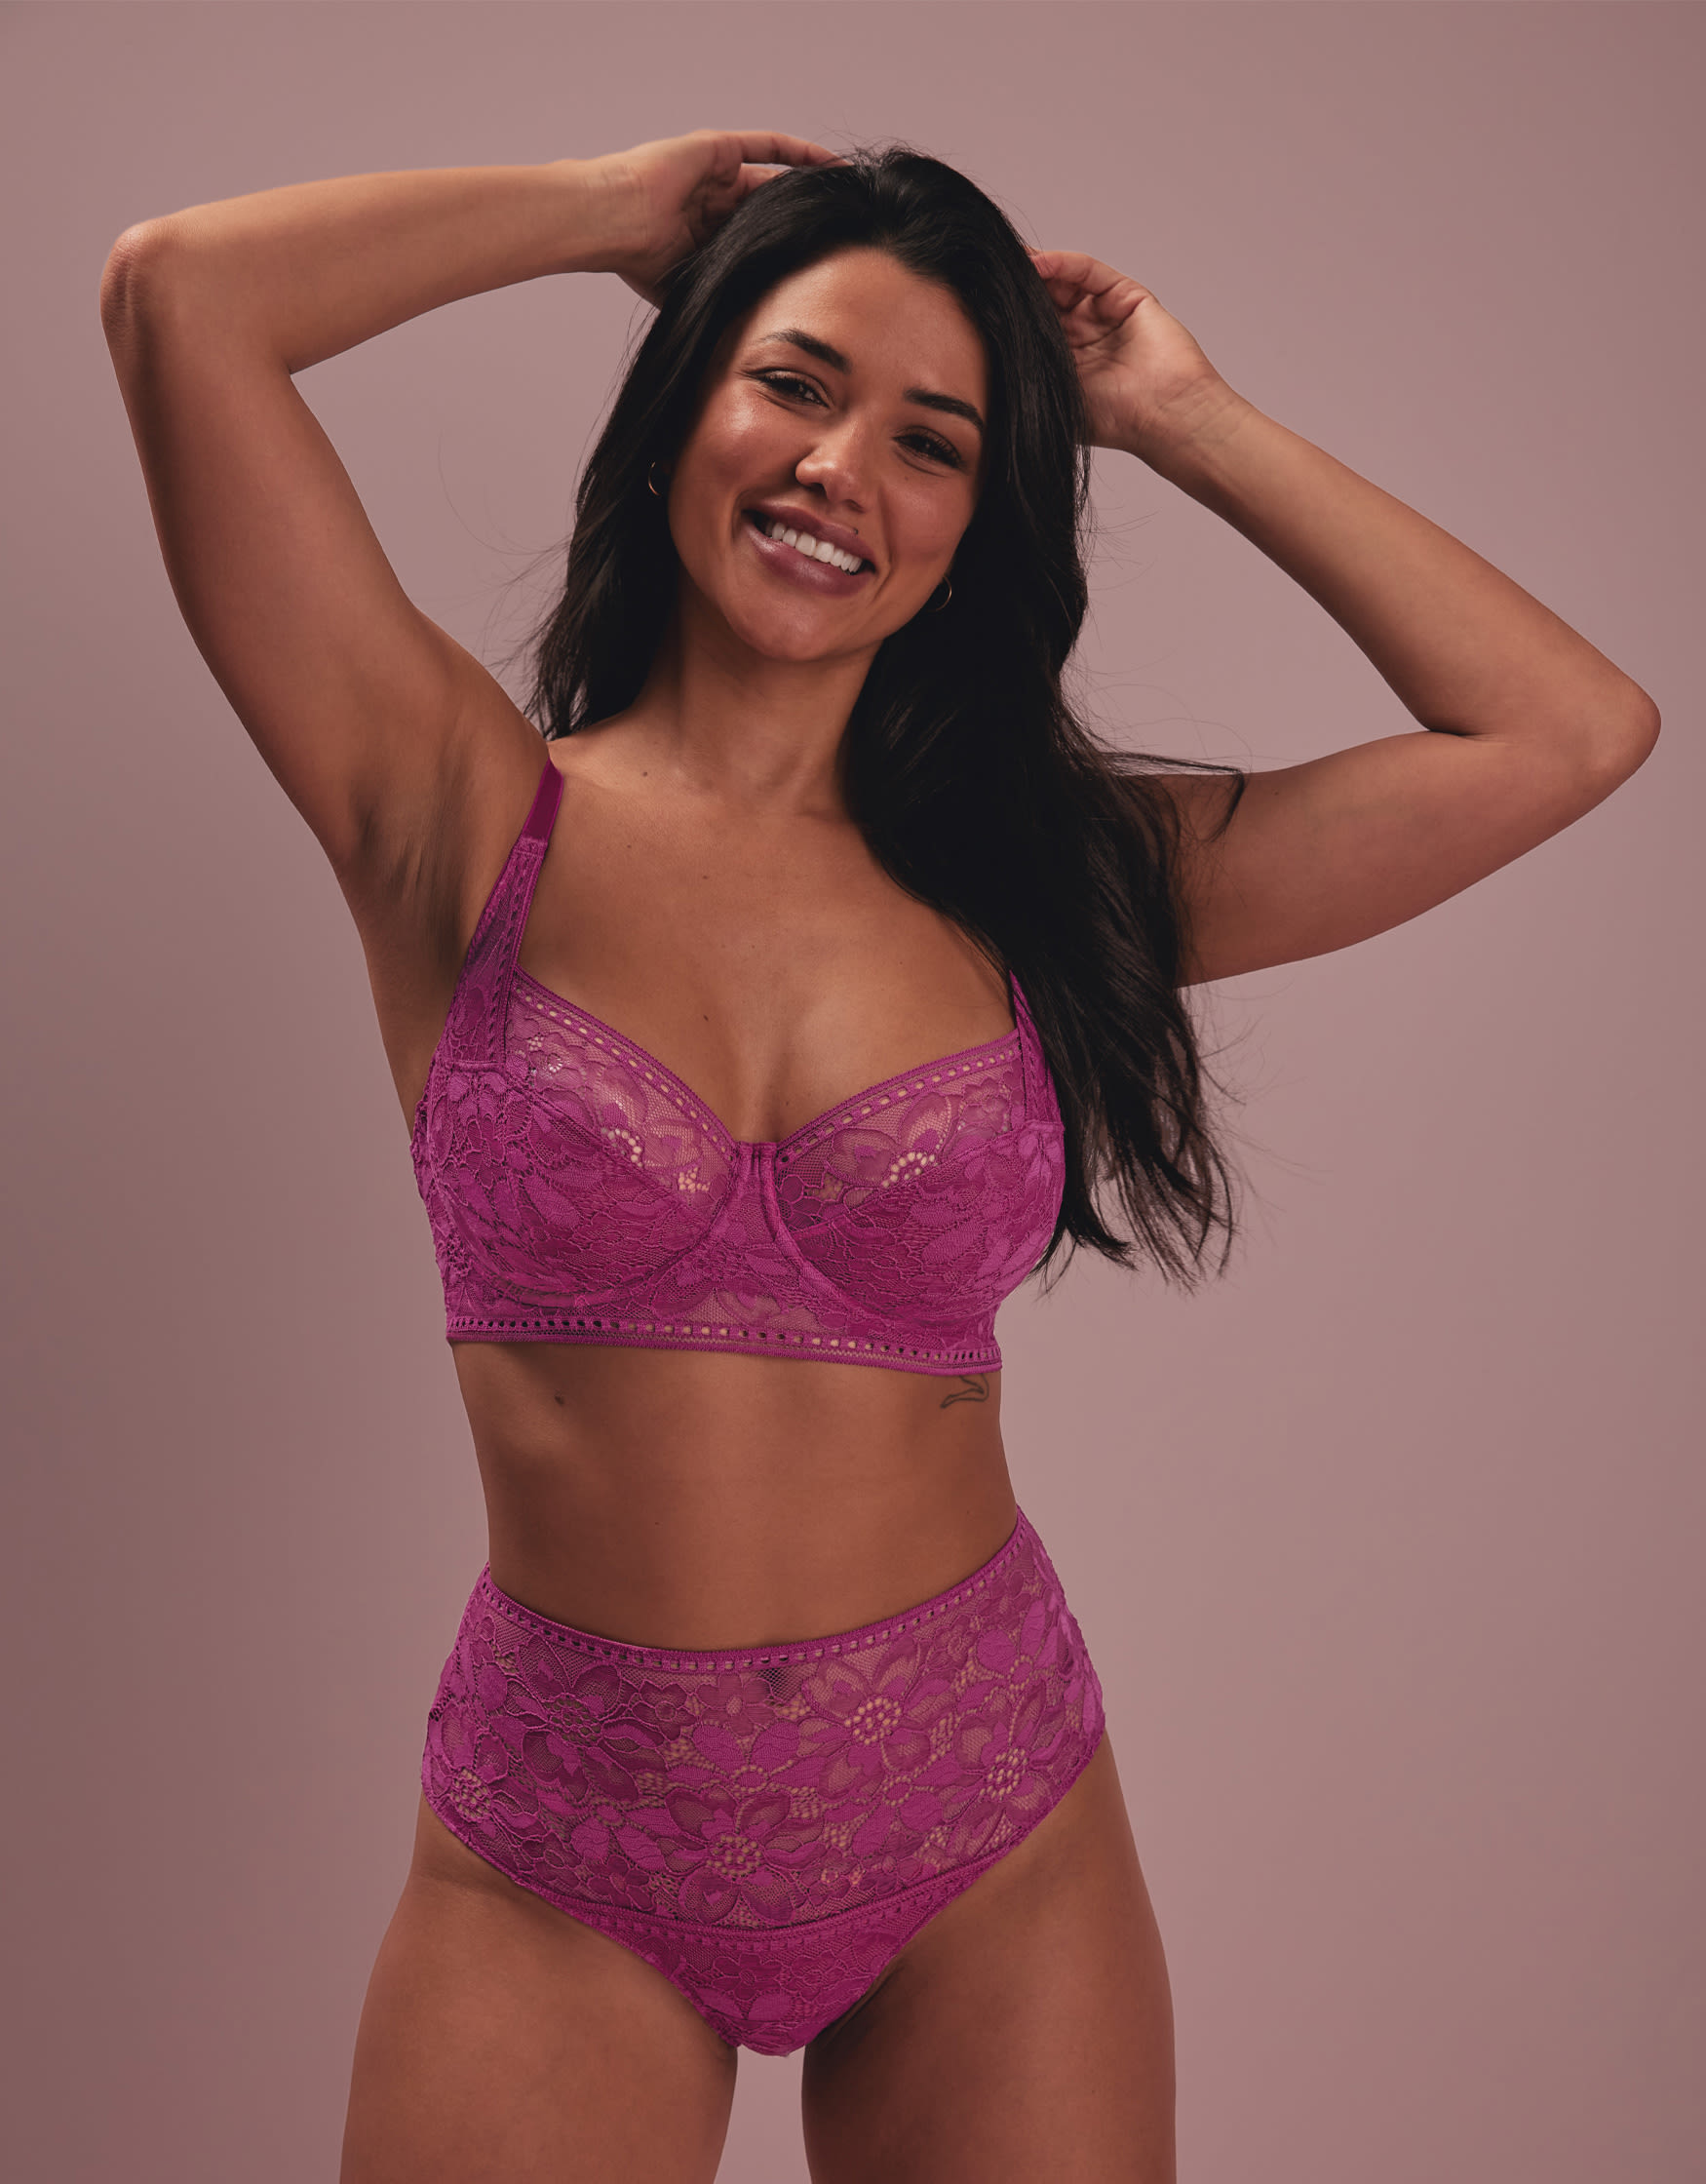 Lingerie Sets in the size 32H for Women on sale